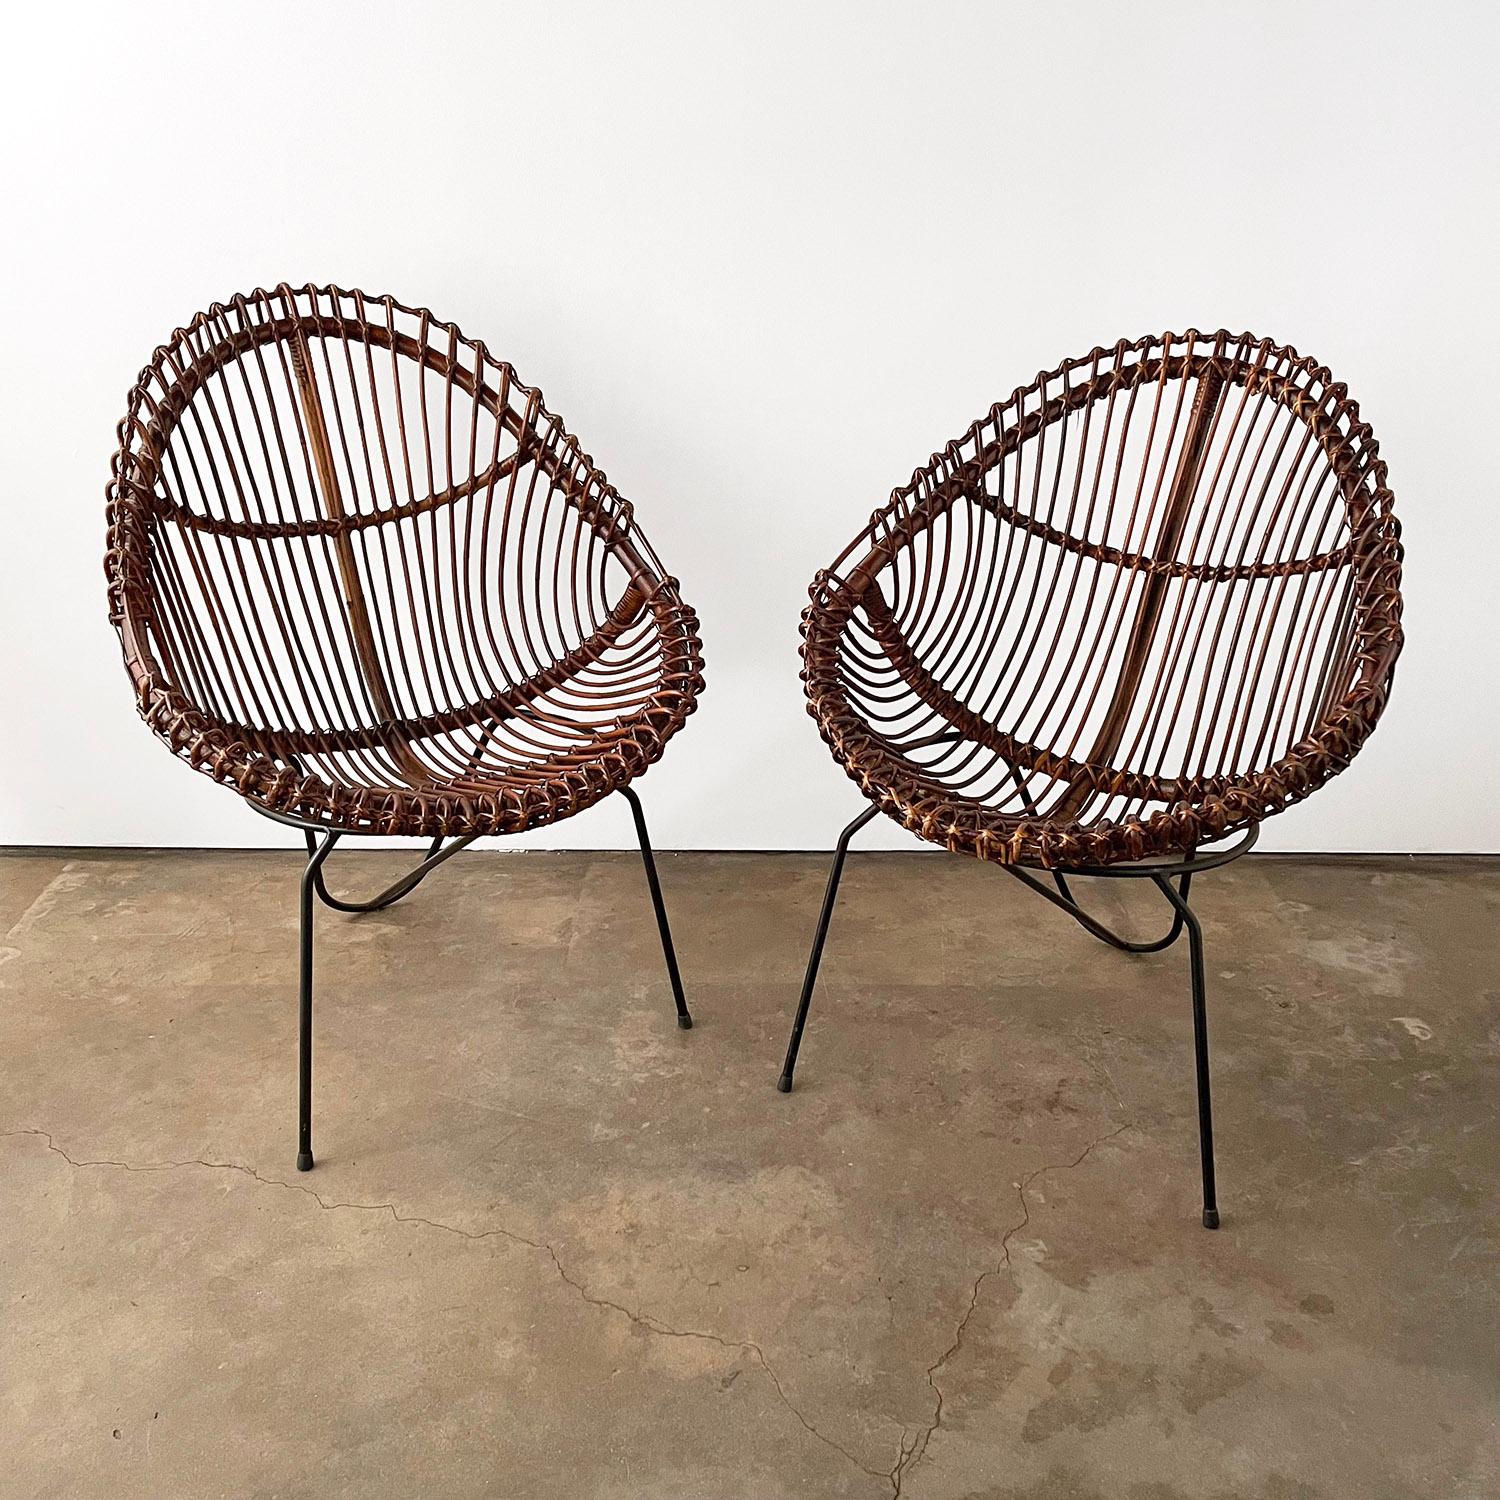 Mid Century Italian Sculpted Rattan & Iron Chairs 
Sculptural handwoven rattan and iron hoop chairs
Black metal curved hairpin base
Patina from age and use
Newly reconditioned 
Timeless classic 